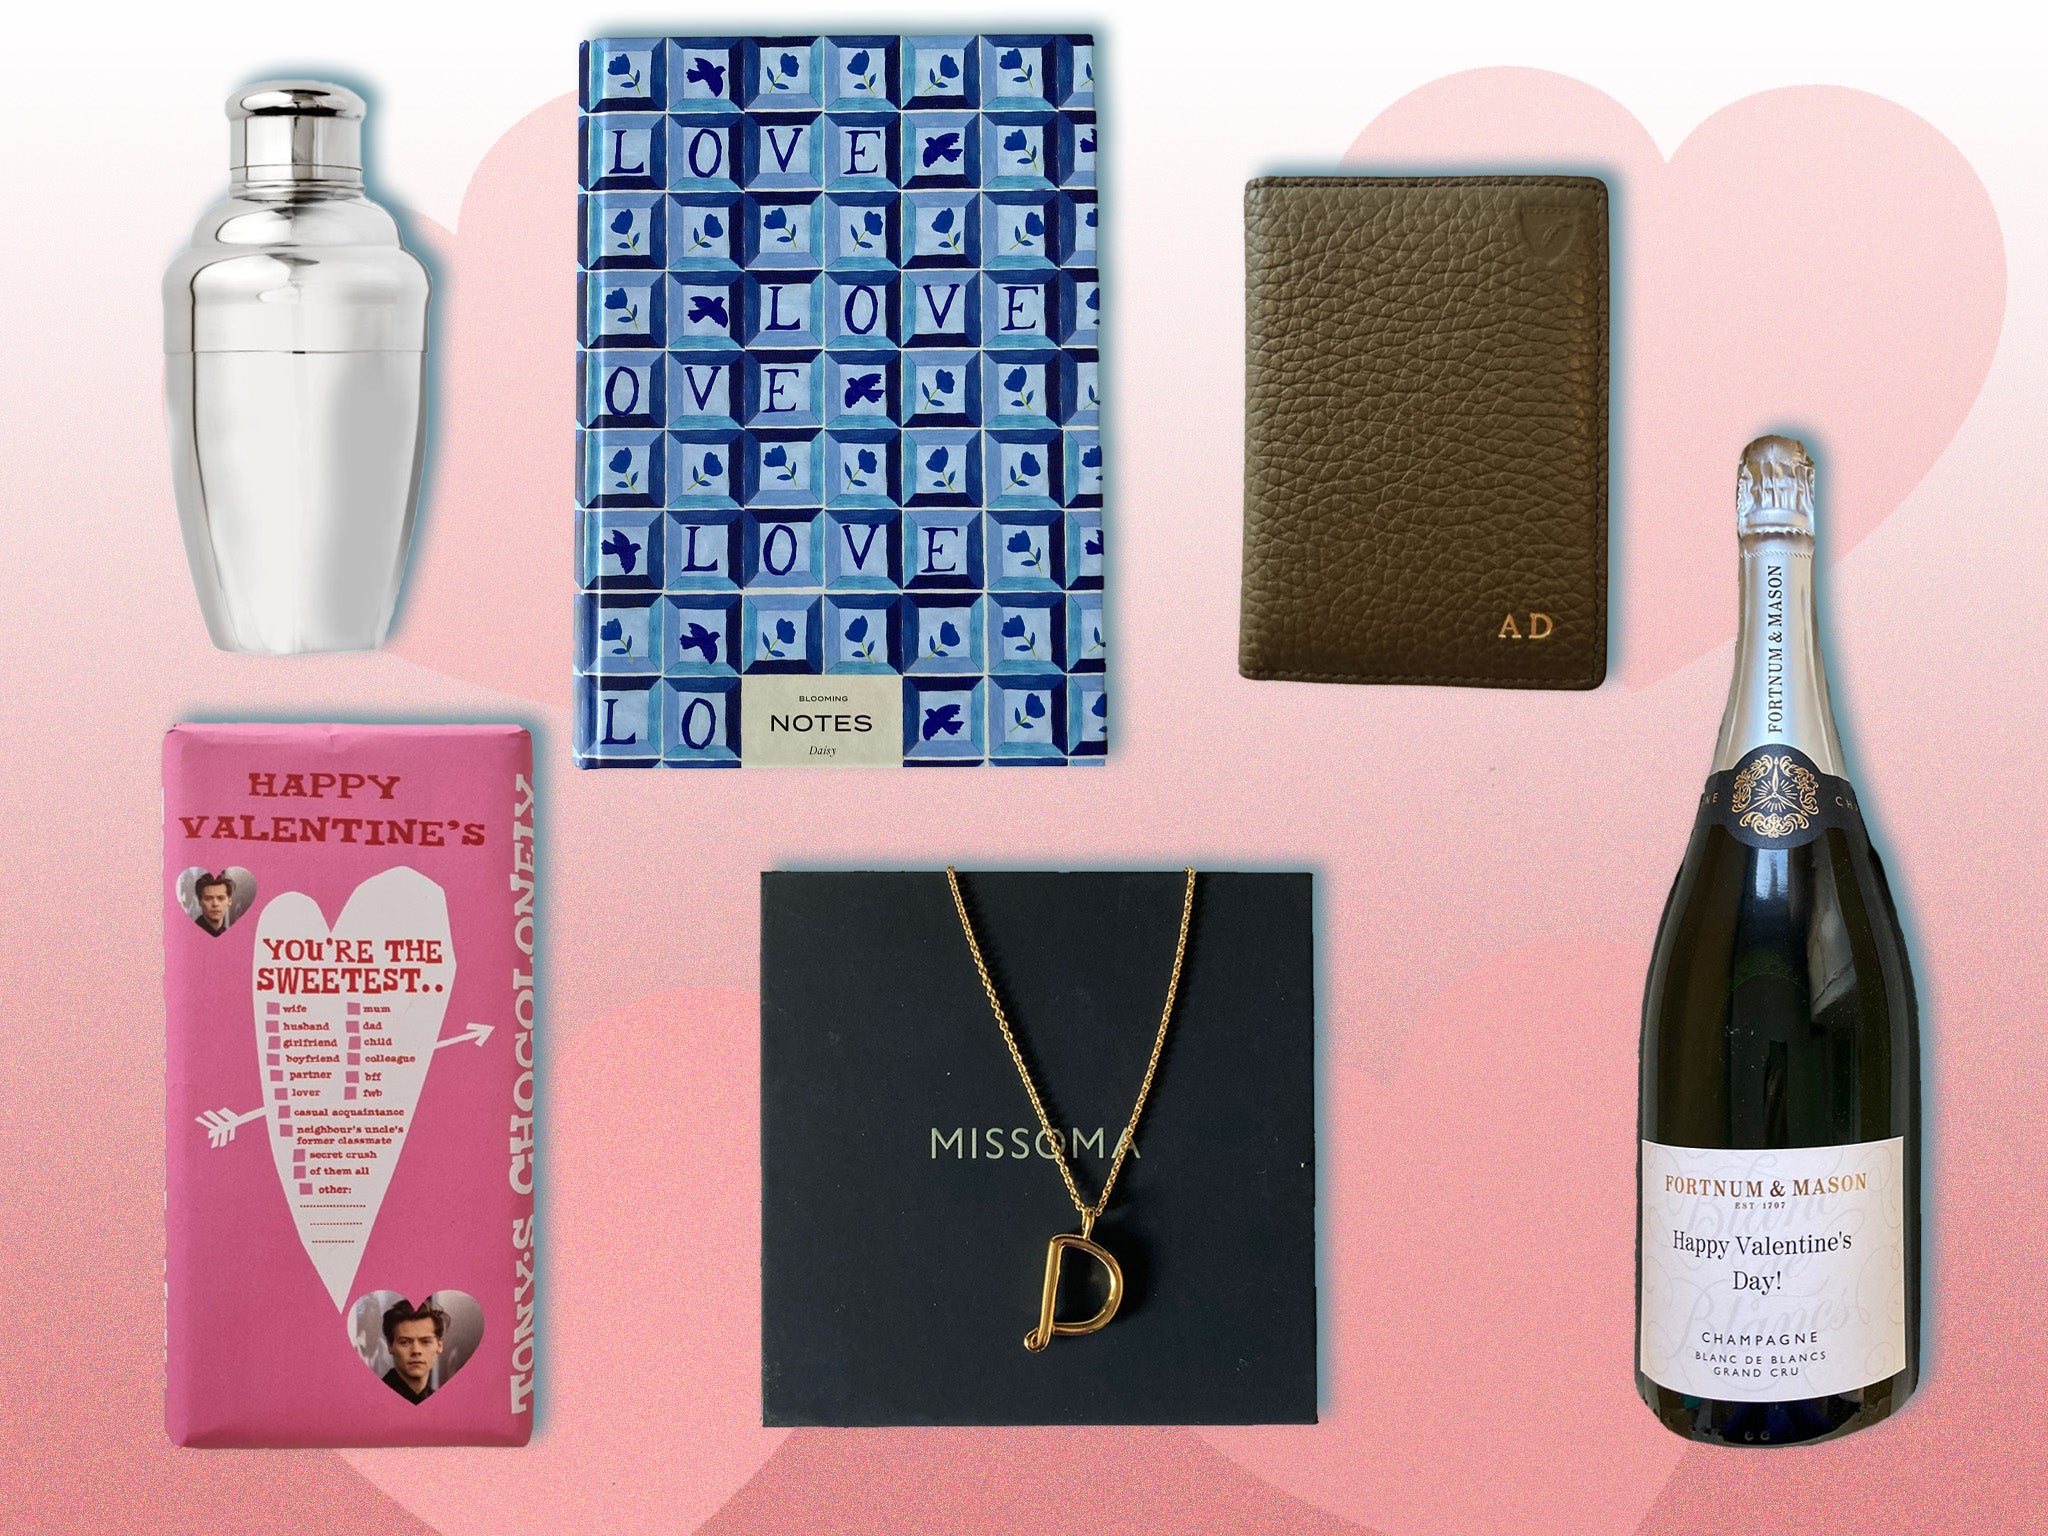 Looking to gift something with a personal touch? Our guide has you covered